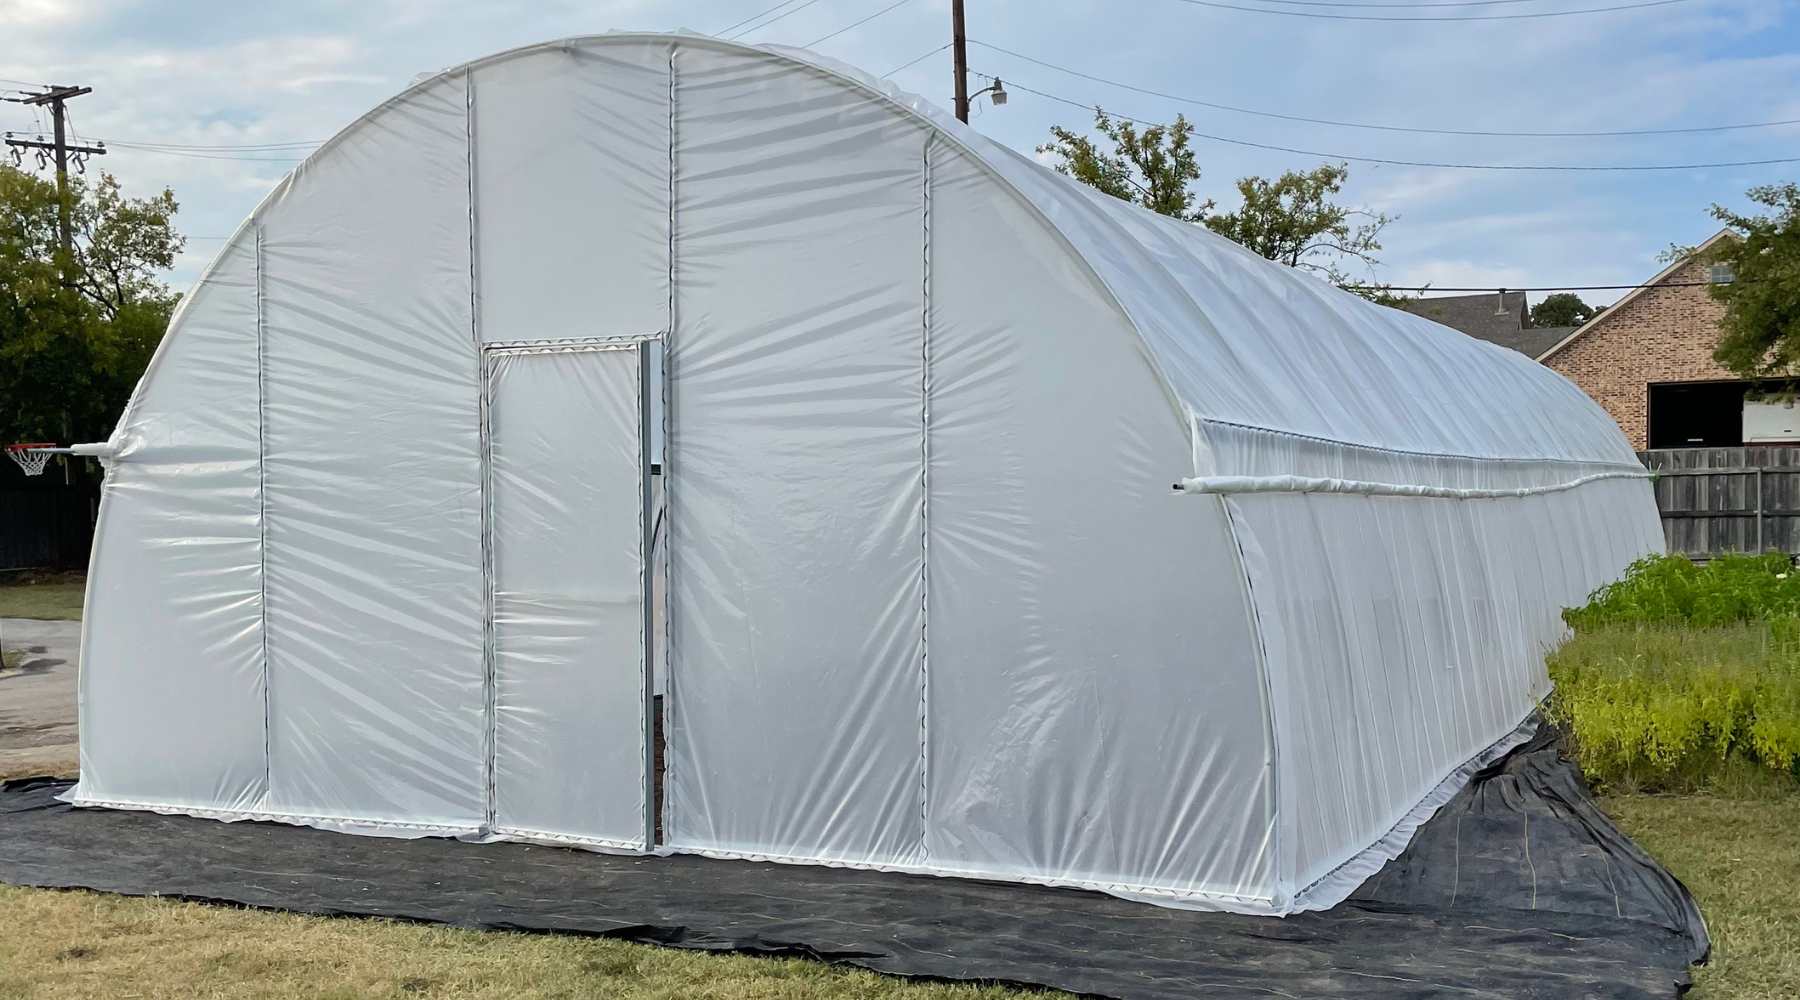 Double Layer Inflation kits for hoop house greenhouses